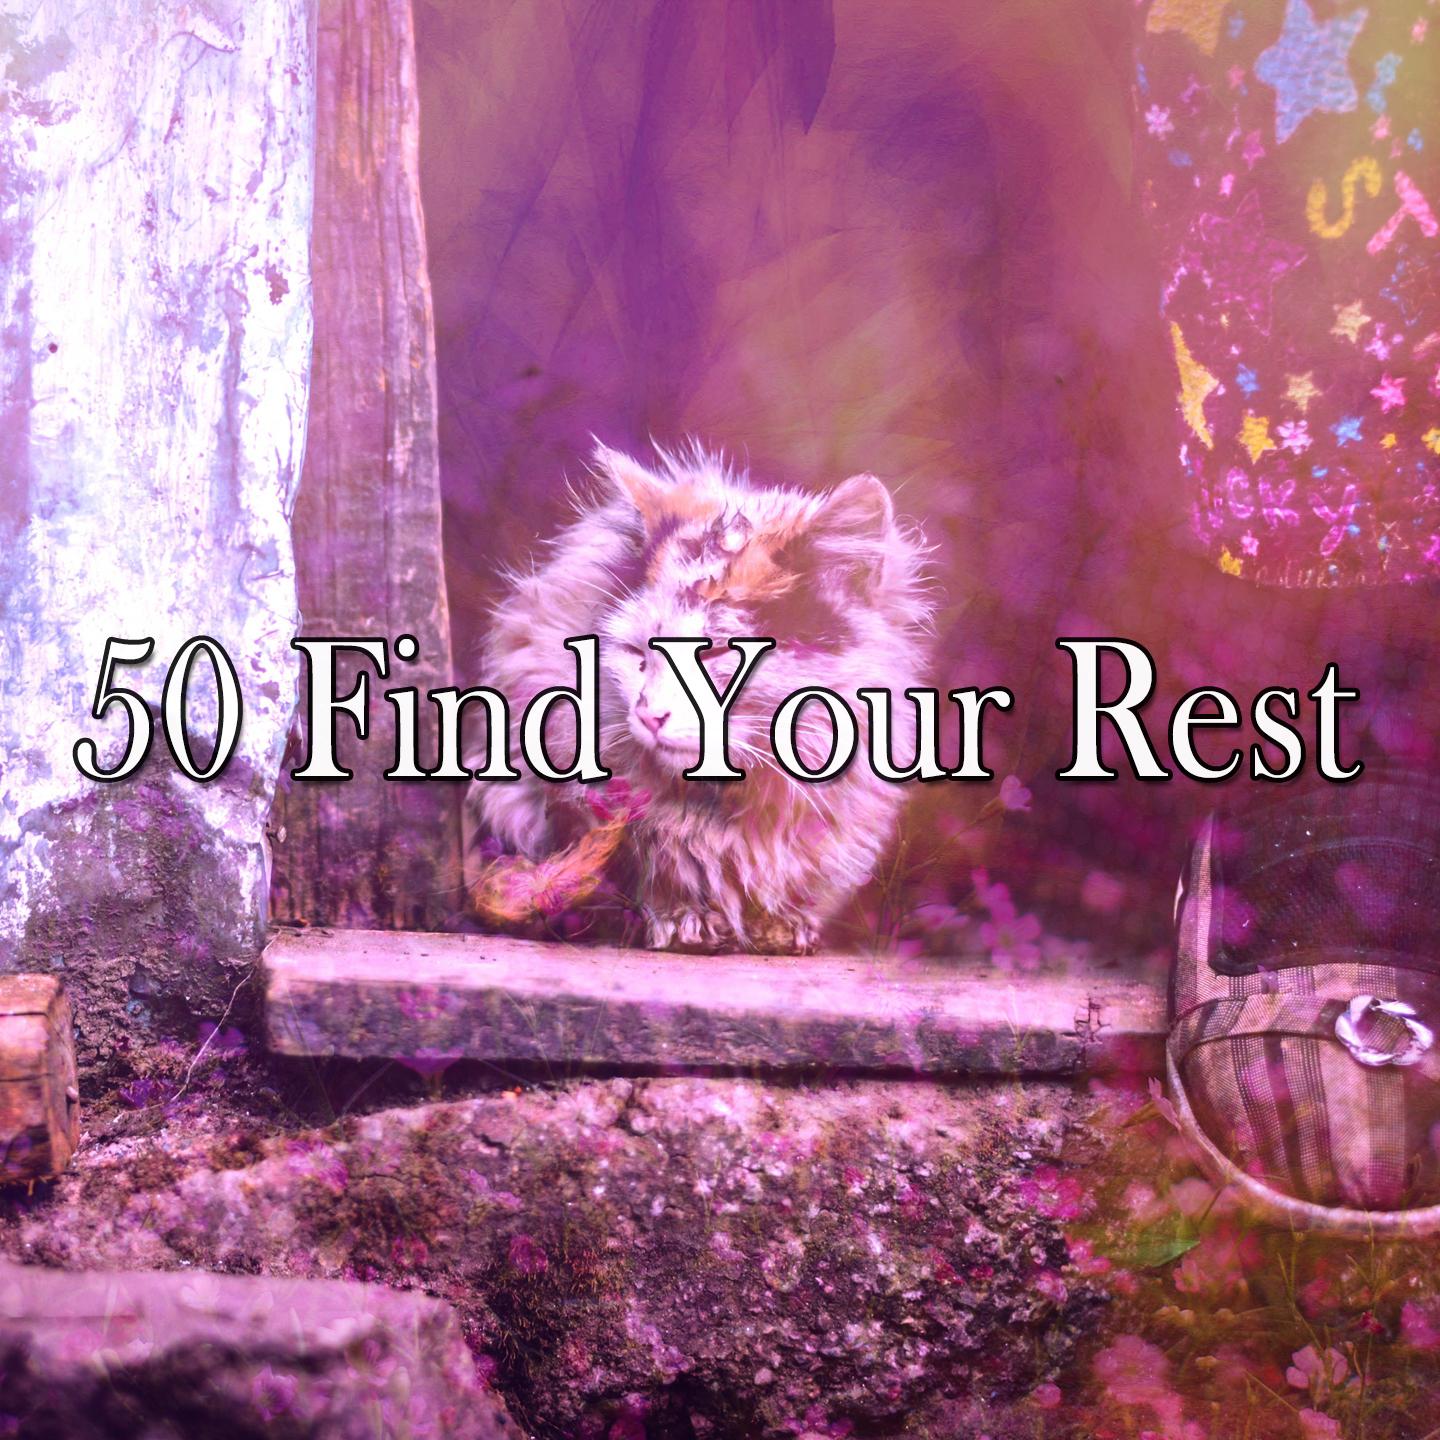 50 Find Your Rest